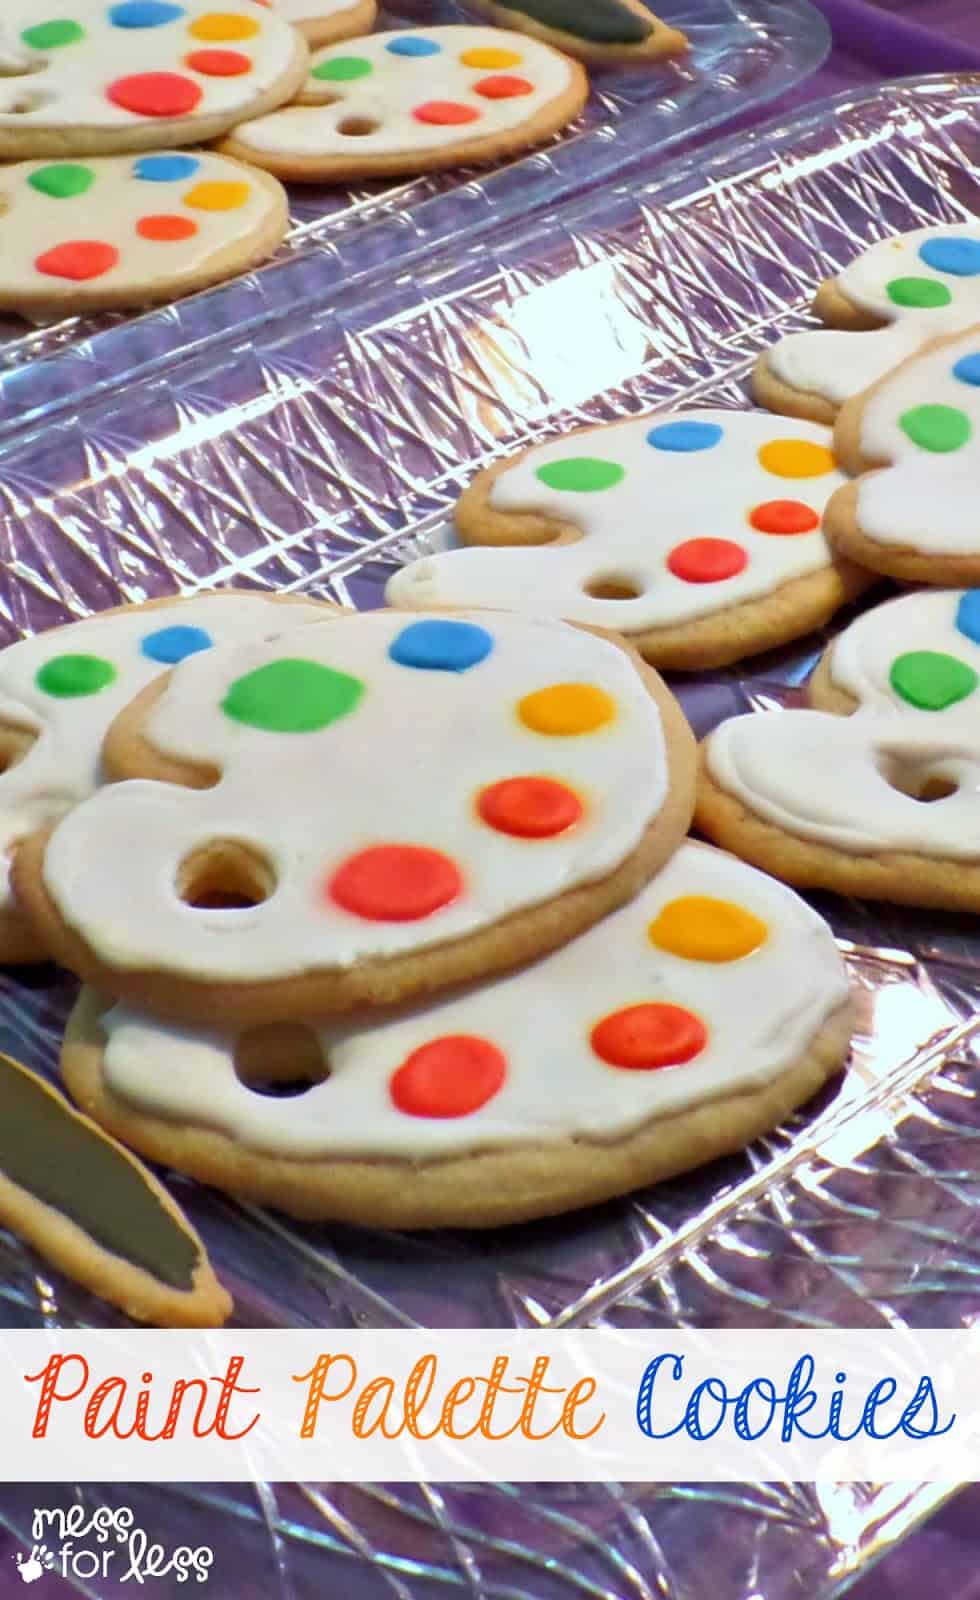 Paint Palette Cookies for an Art Party - Food Fun Friday: These cookies look difficult to make, but here are some tips to make simplify the process.